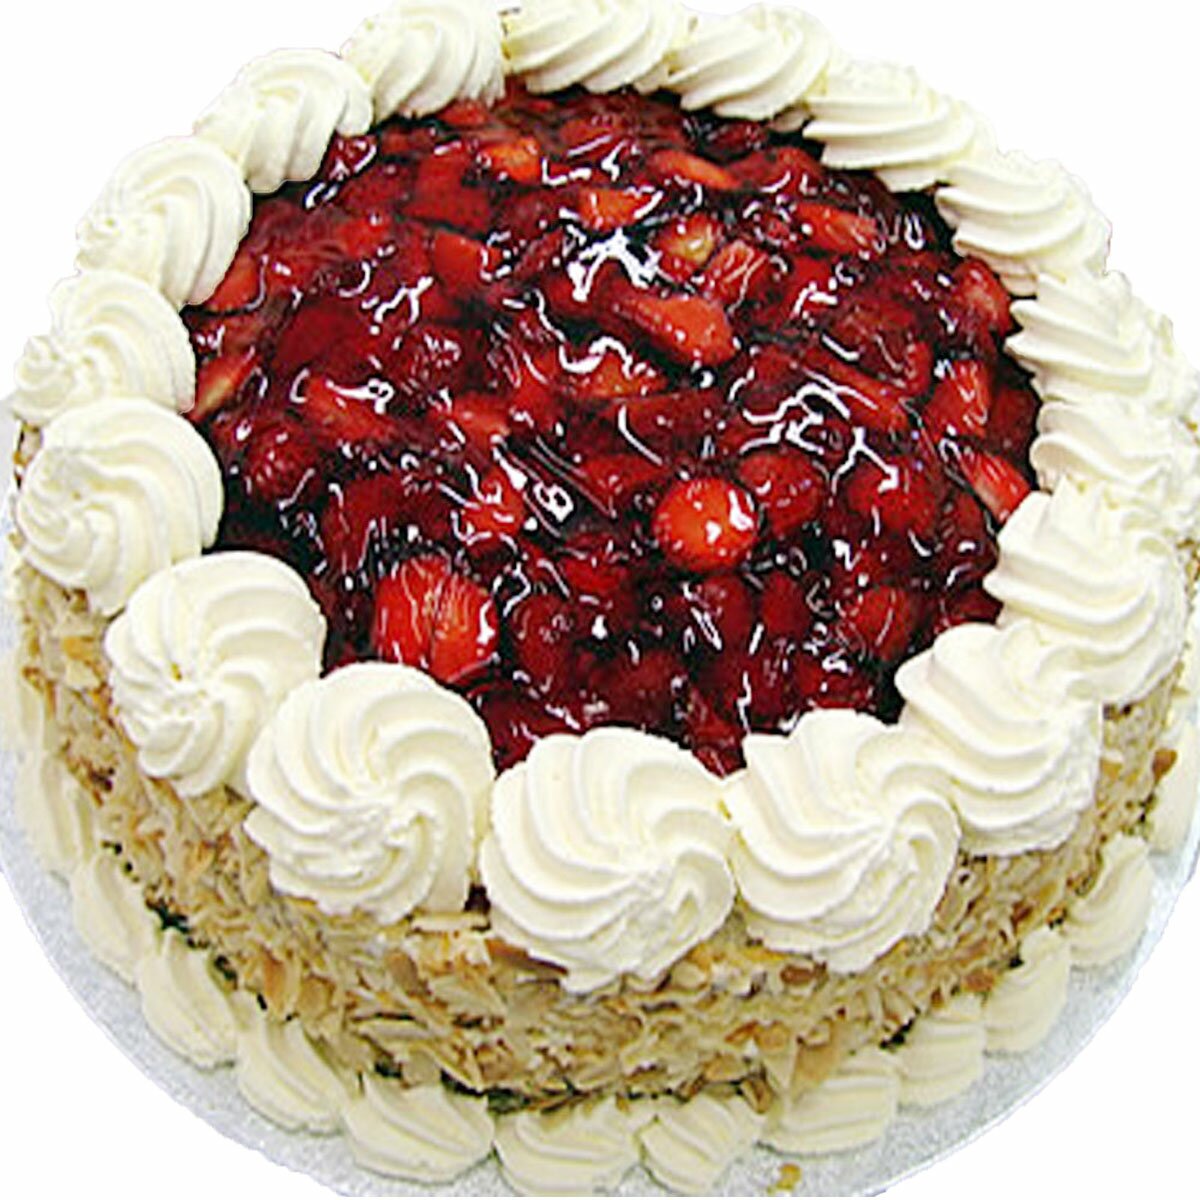 STRAWERRY WITH ALMOND FLAKES, online cake order in gurgaon